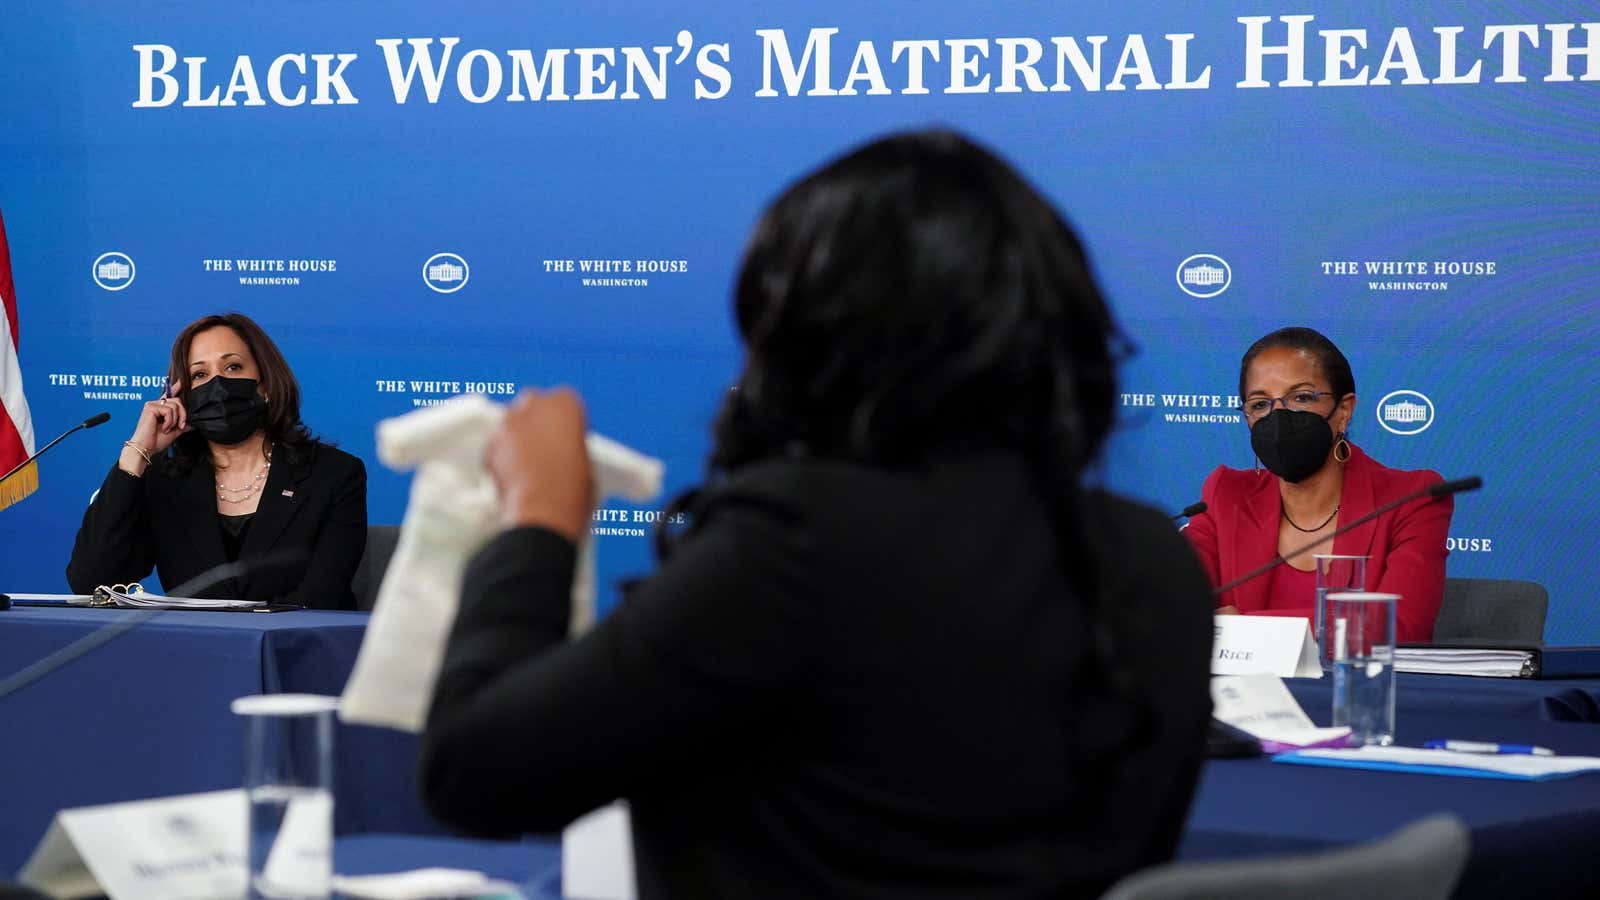 More than 80% of maternal deaths in the US are preventable